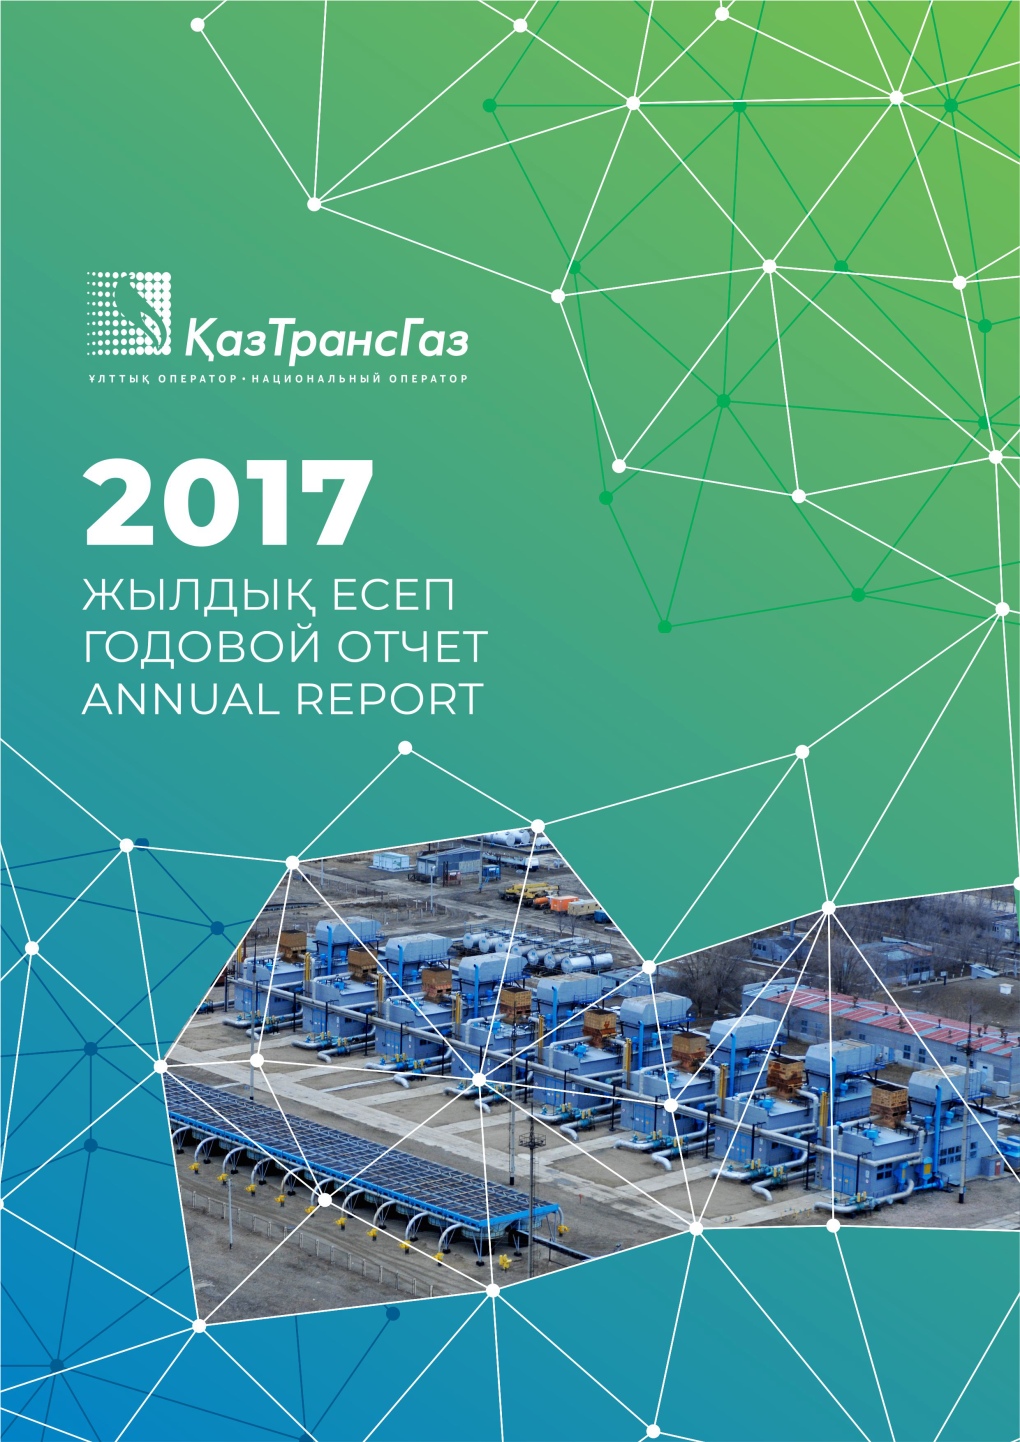 ANNUAL REPORT 2017 “Kaztransgas” JSC Has Become the Most Important and Technologically Most Powerful Operator of Gas ﬂows in the Central Asia